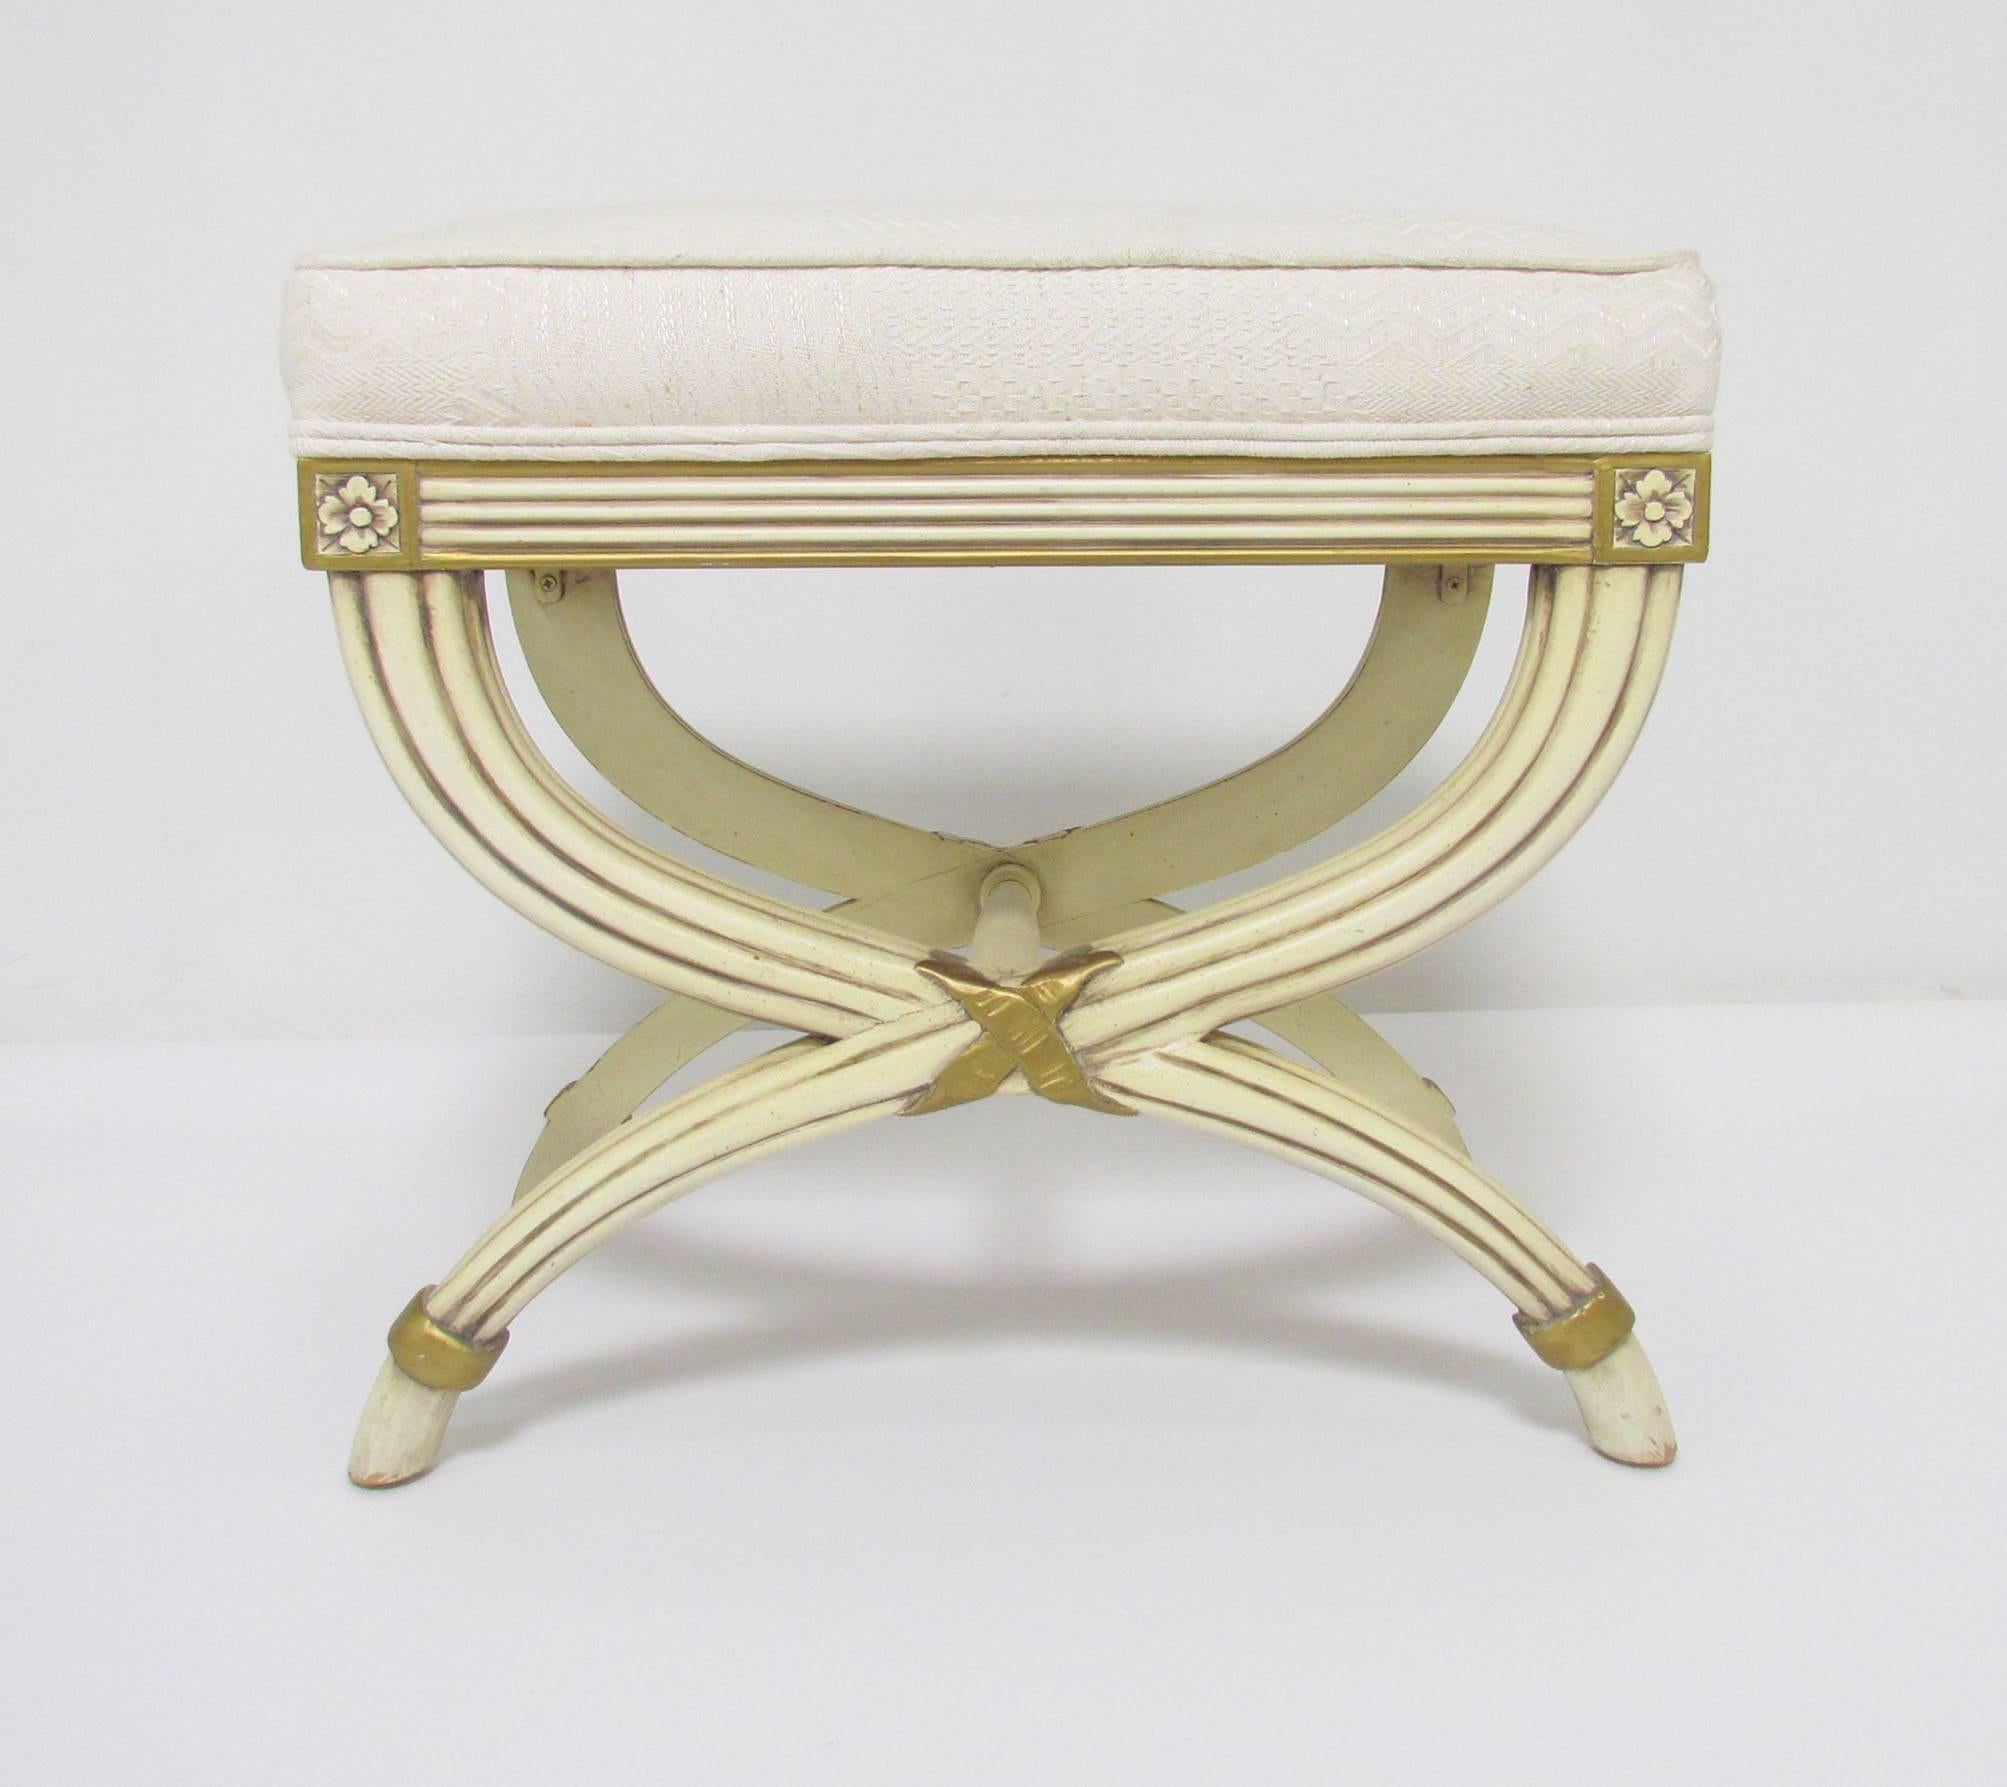 Pair of upholstered stools with neoclassical design elements, X-form legs carved florets and gilded accents, by Karges Furniture, circa 1950s.